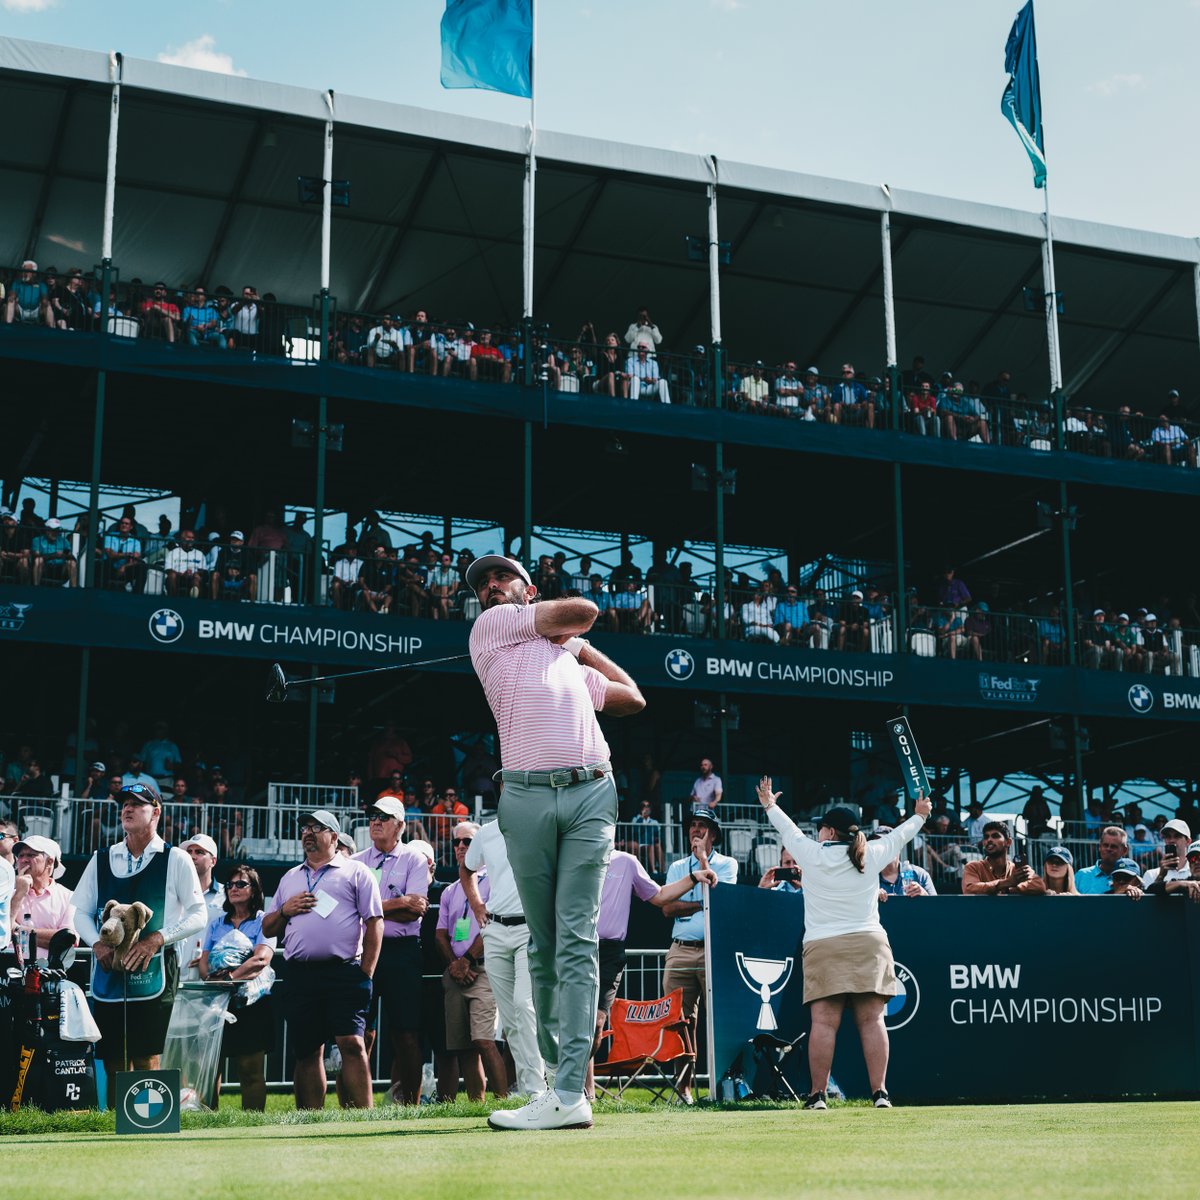 #BMWCHAMPS tickets make a great last-minute Mother’s Day gift. Ticket link: bit.ly/3ERby25 You’re welcome.